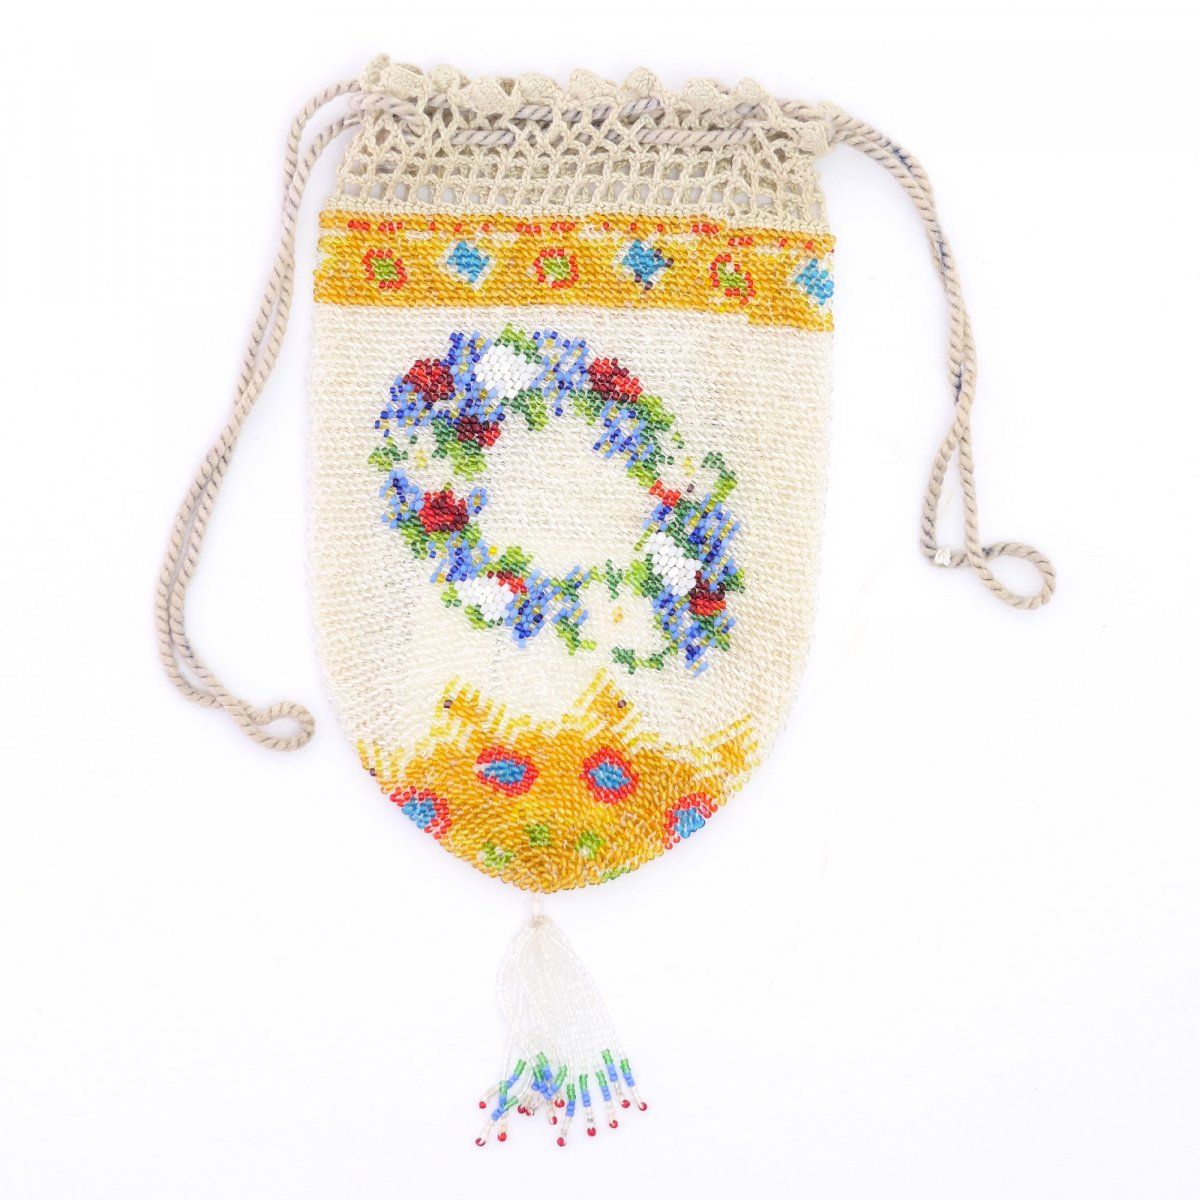 Null Pouch with flower wreath, mid-19th century, H. 23 x 11 cm. Crocheted polych&hellip;